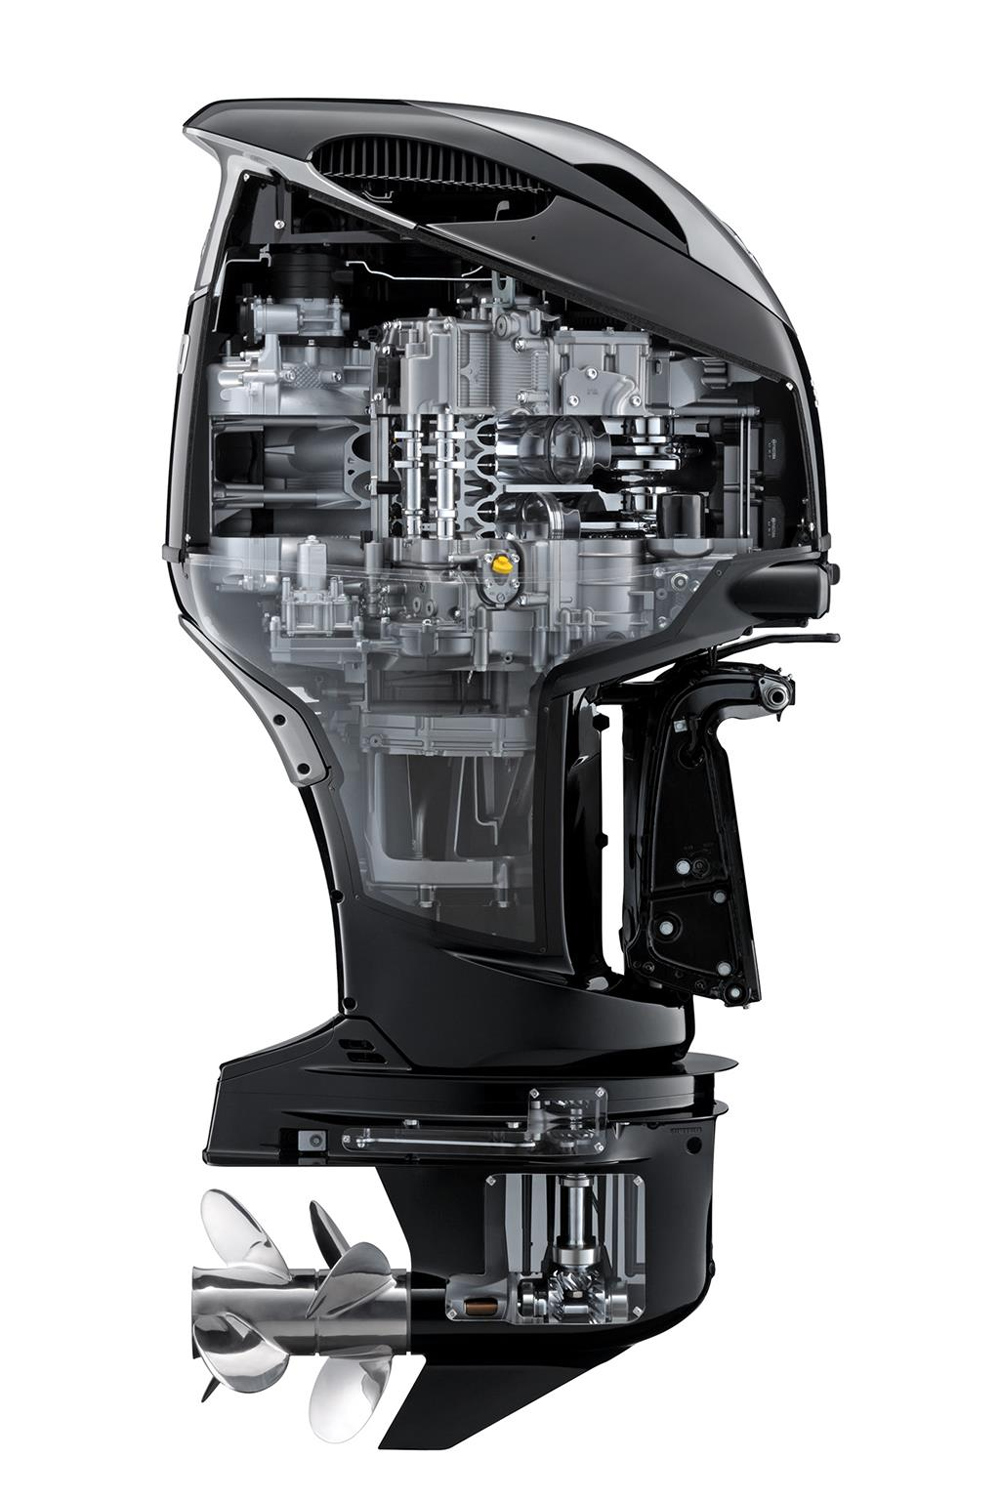 Best Outboard Engines In 2021 